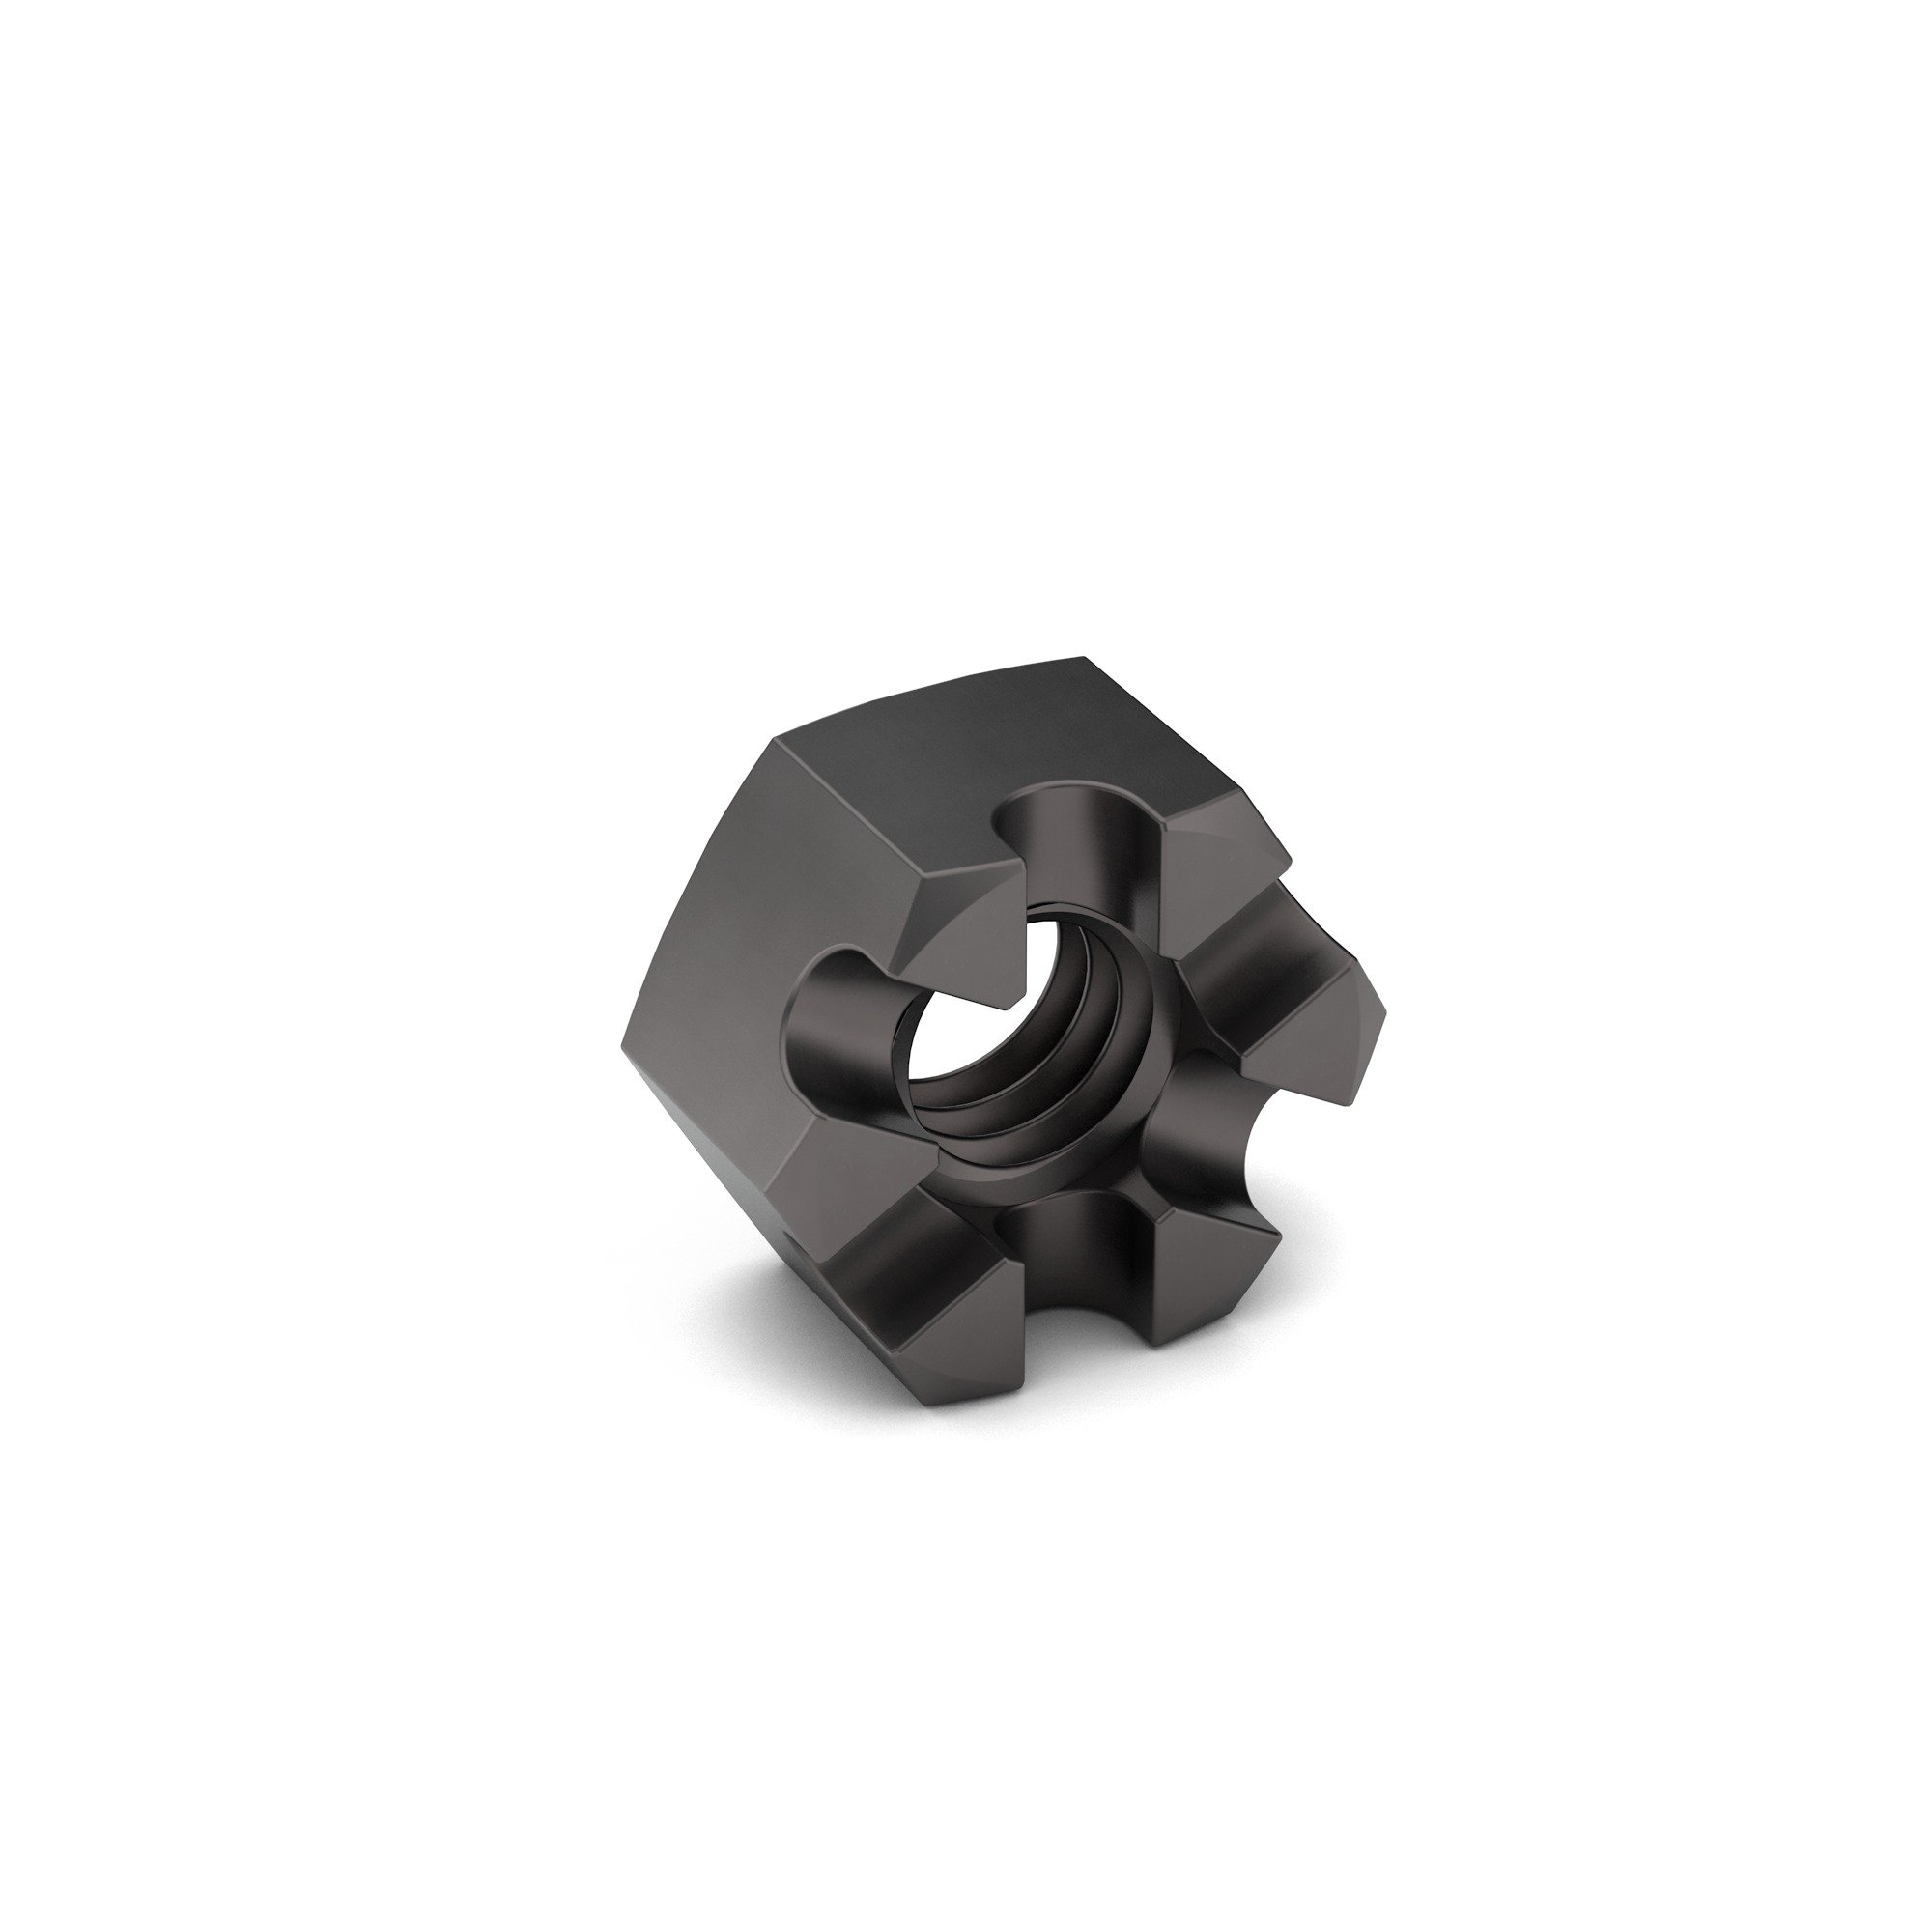 1 1/2-6 Carbon Steel Slotted Hex Nut Plain Finish